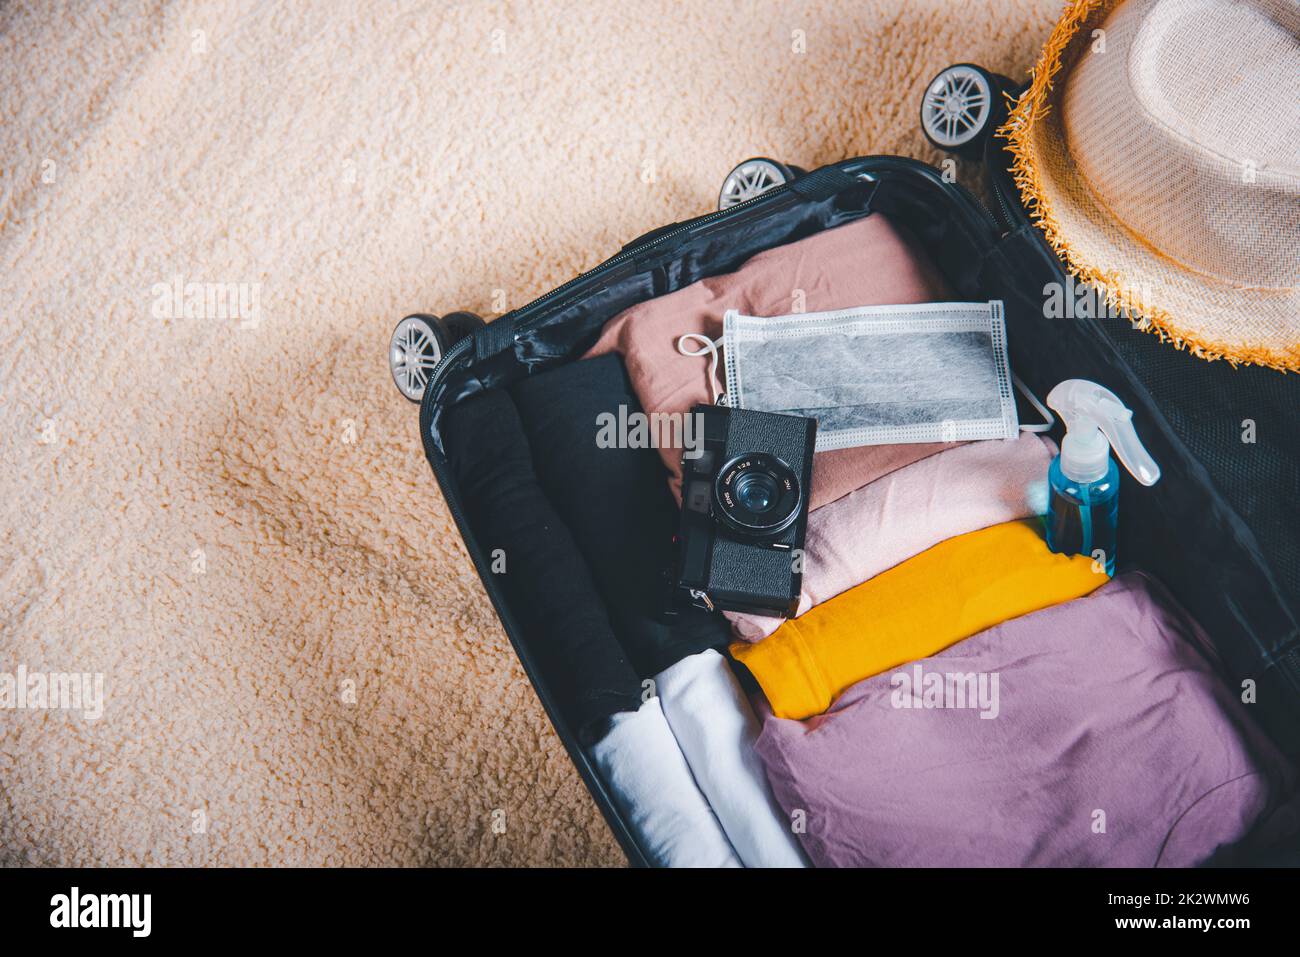 Open suitcase with traveler belongings clothes and accessories of things ready packing to be taken on summer holiday Stock Photo